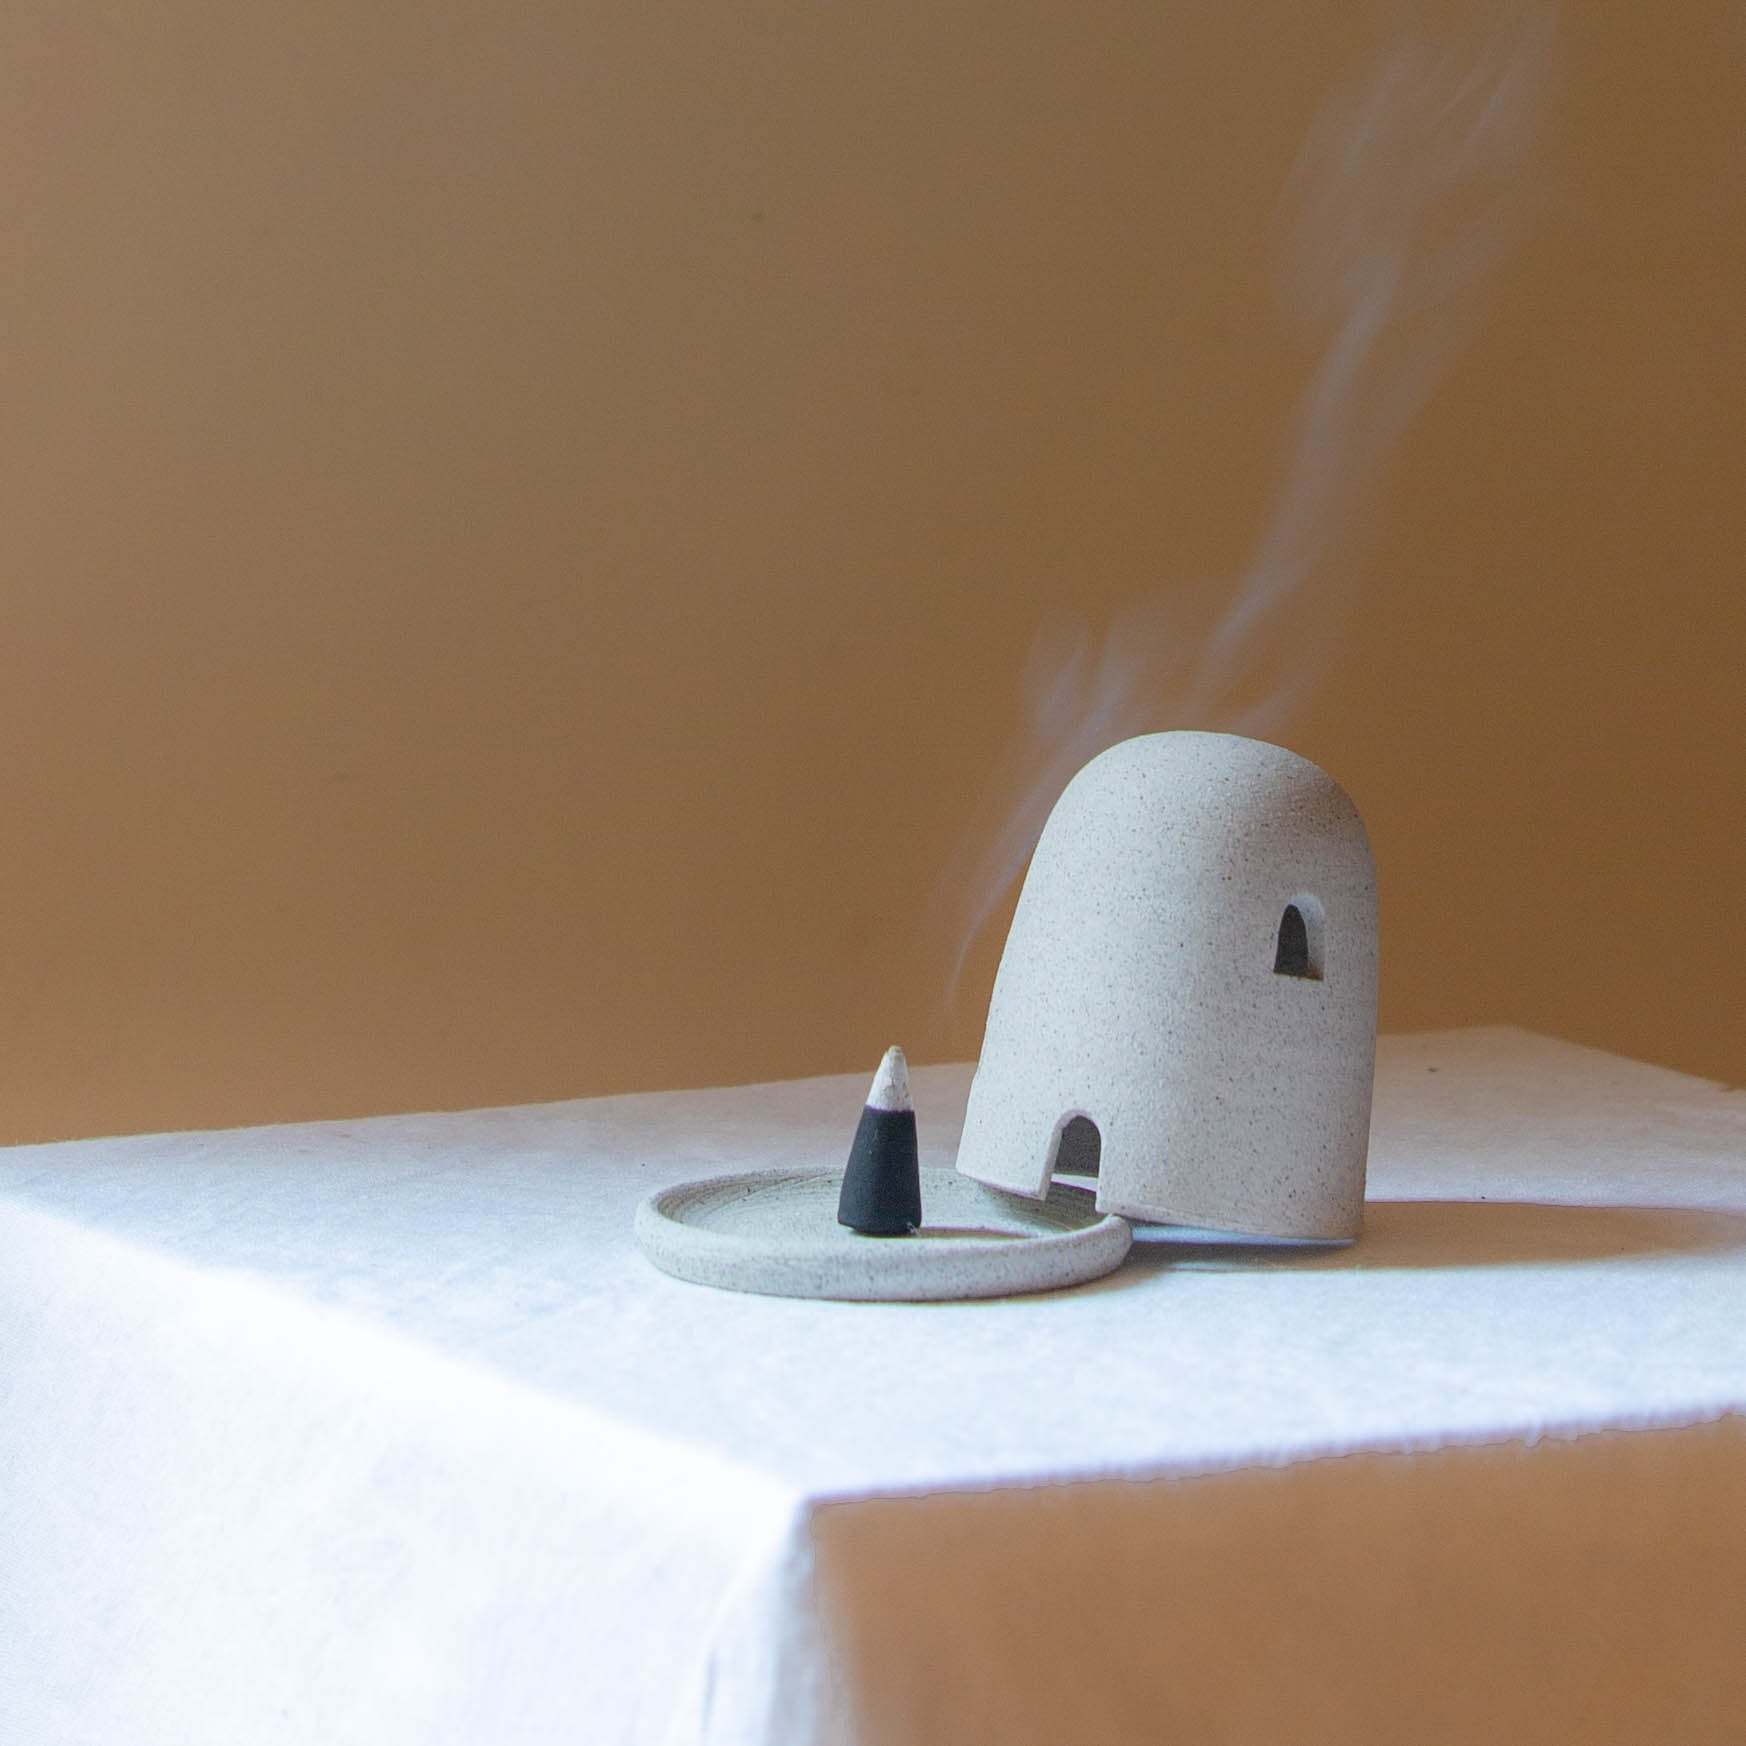 A Dome Burner in speckled grey colour sitting on a white plinth with a lit incense cone which is billowing smoke. The dome burner has a smooth dome top with hand carved windows and sits on a dish.